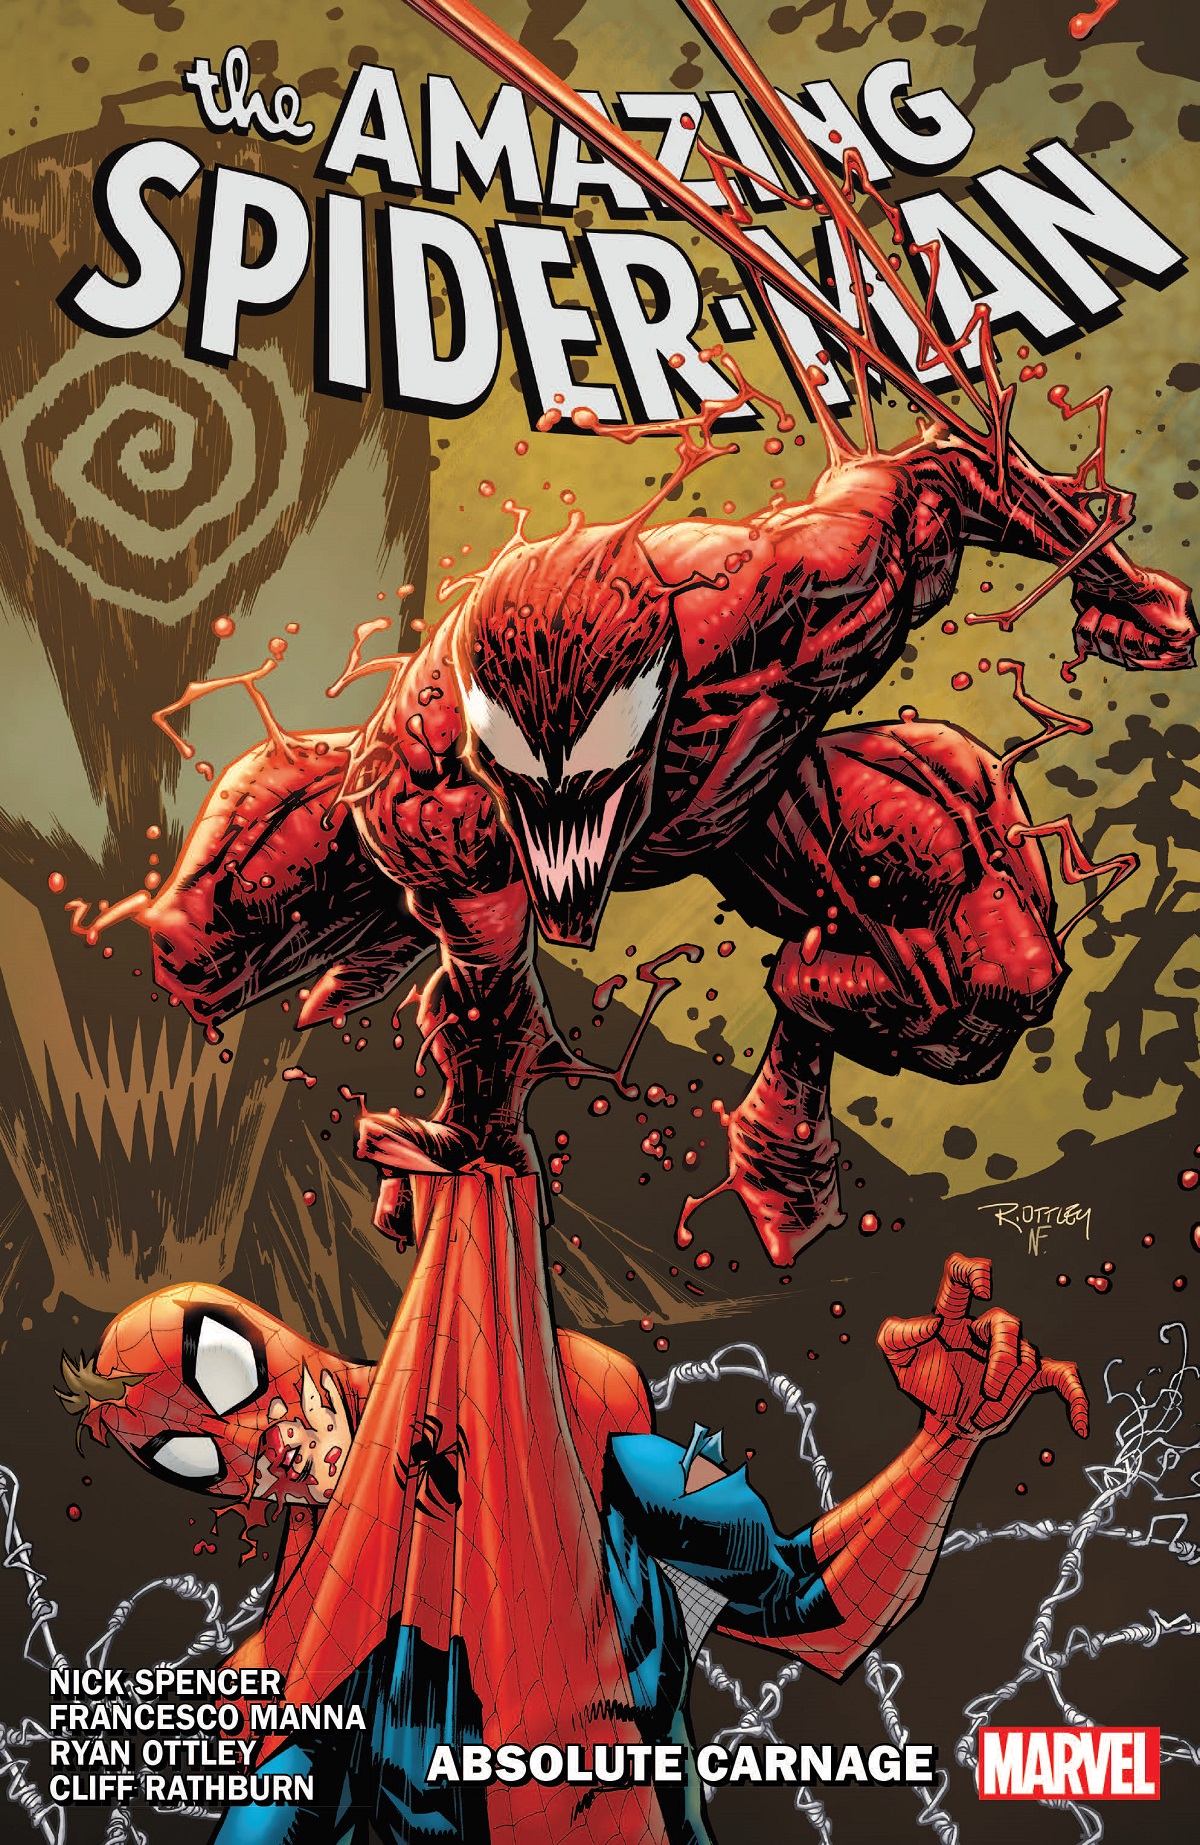 Absolute carnage spiderman